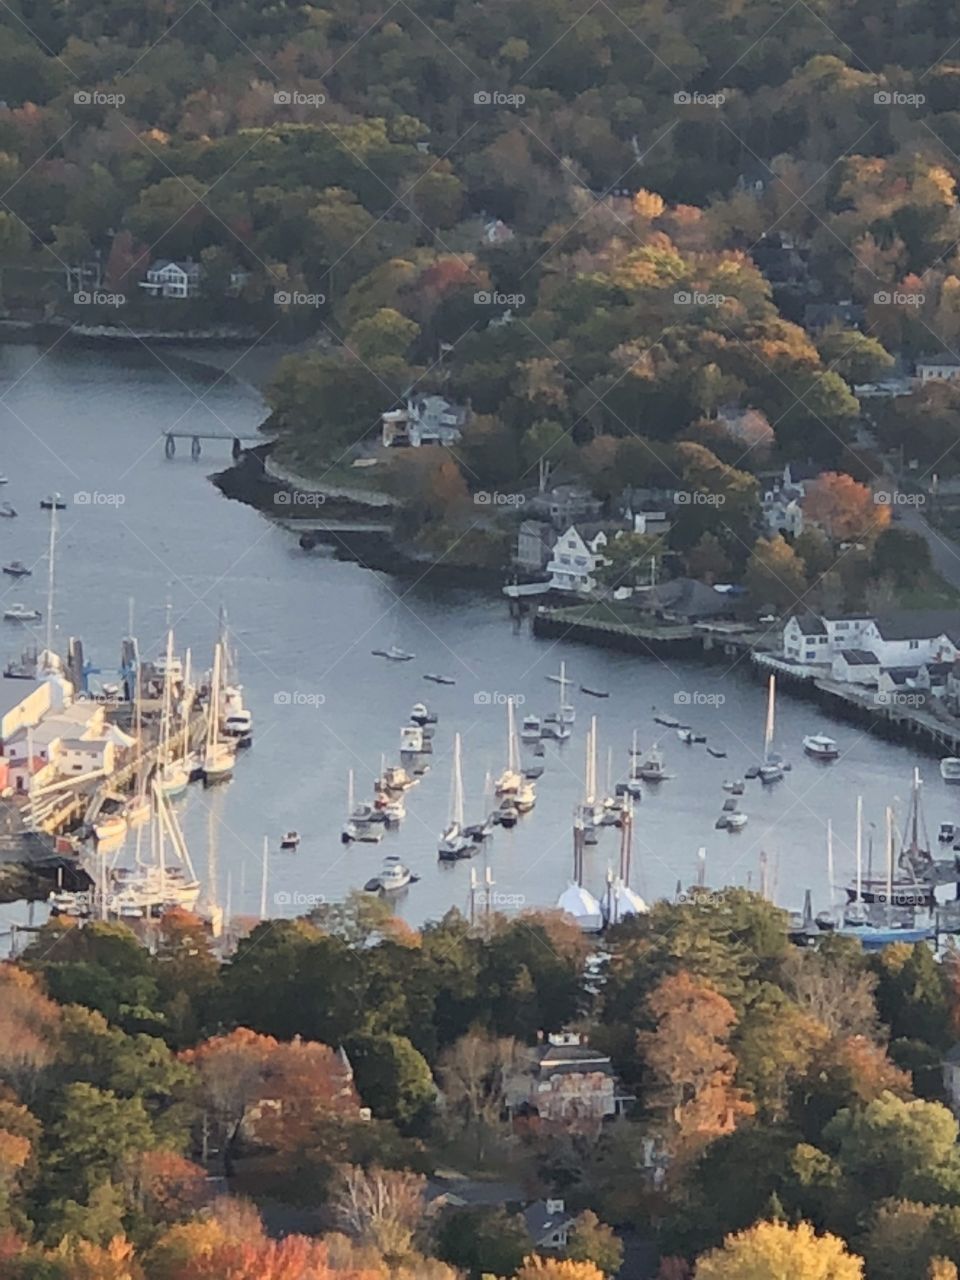 Scenic aerial view of Camden Harbor and Maine coastline  from atop Mount Battie during Autumn season, features water, boats. forest, trees, foliage, buildings